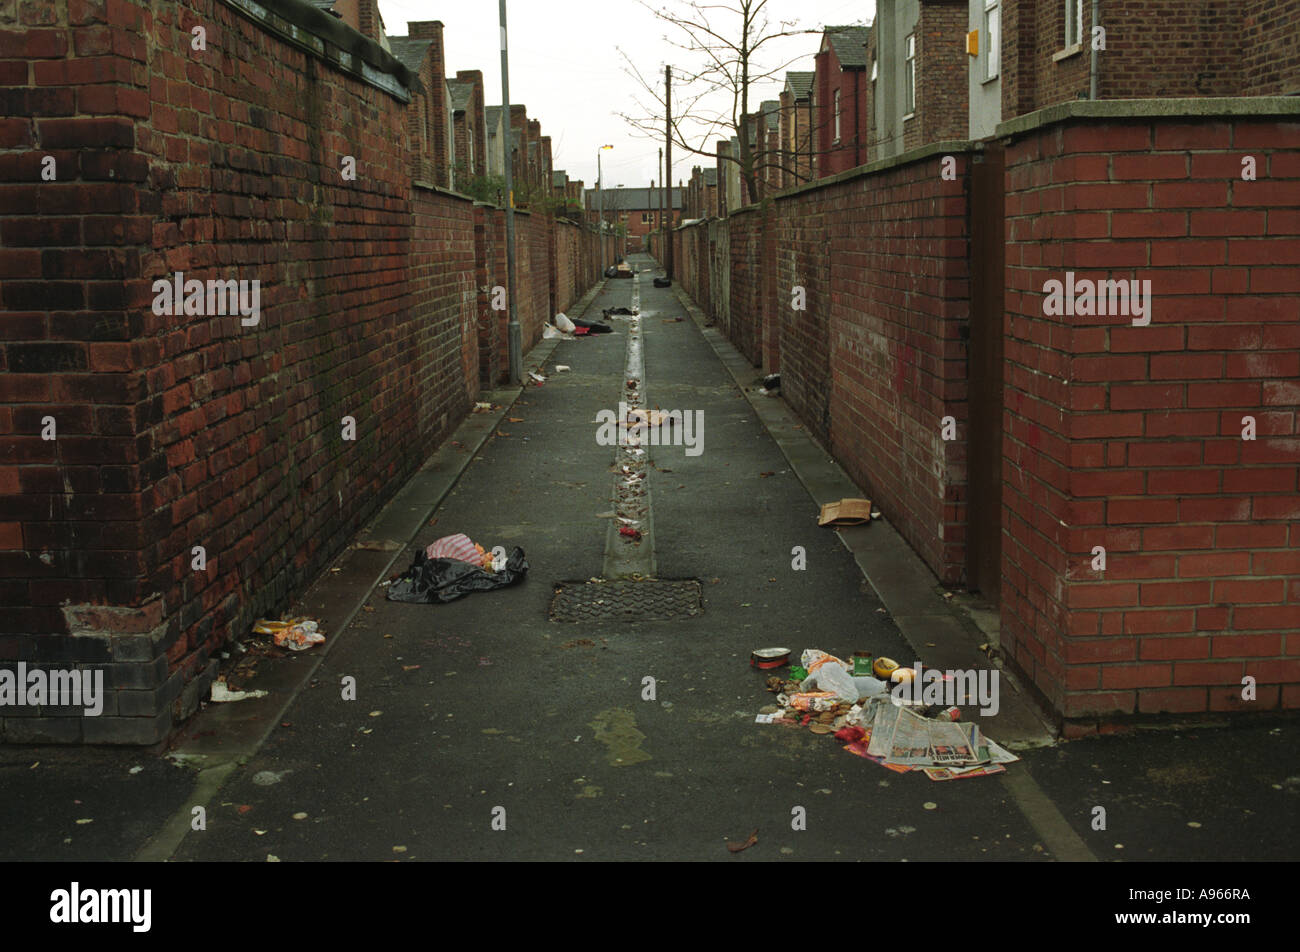 Rubbish strewn about in a back alley of terraced houses. Moss Side, near Manchester. 1993, 1990s UK HOMER SYKES Stock Photo